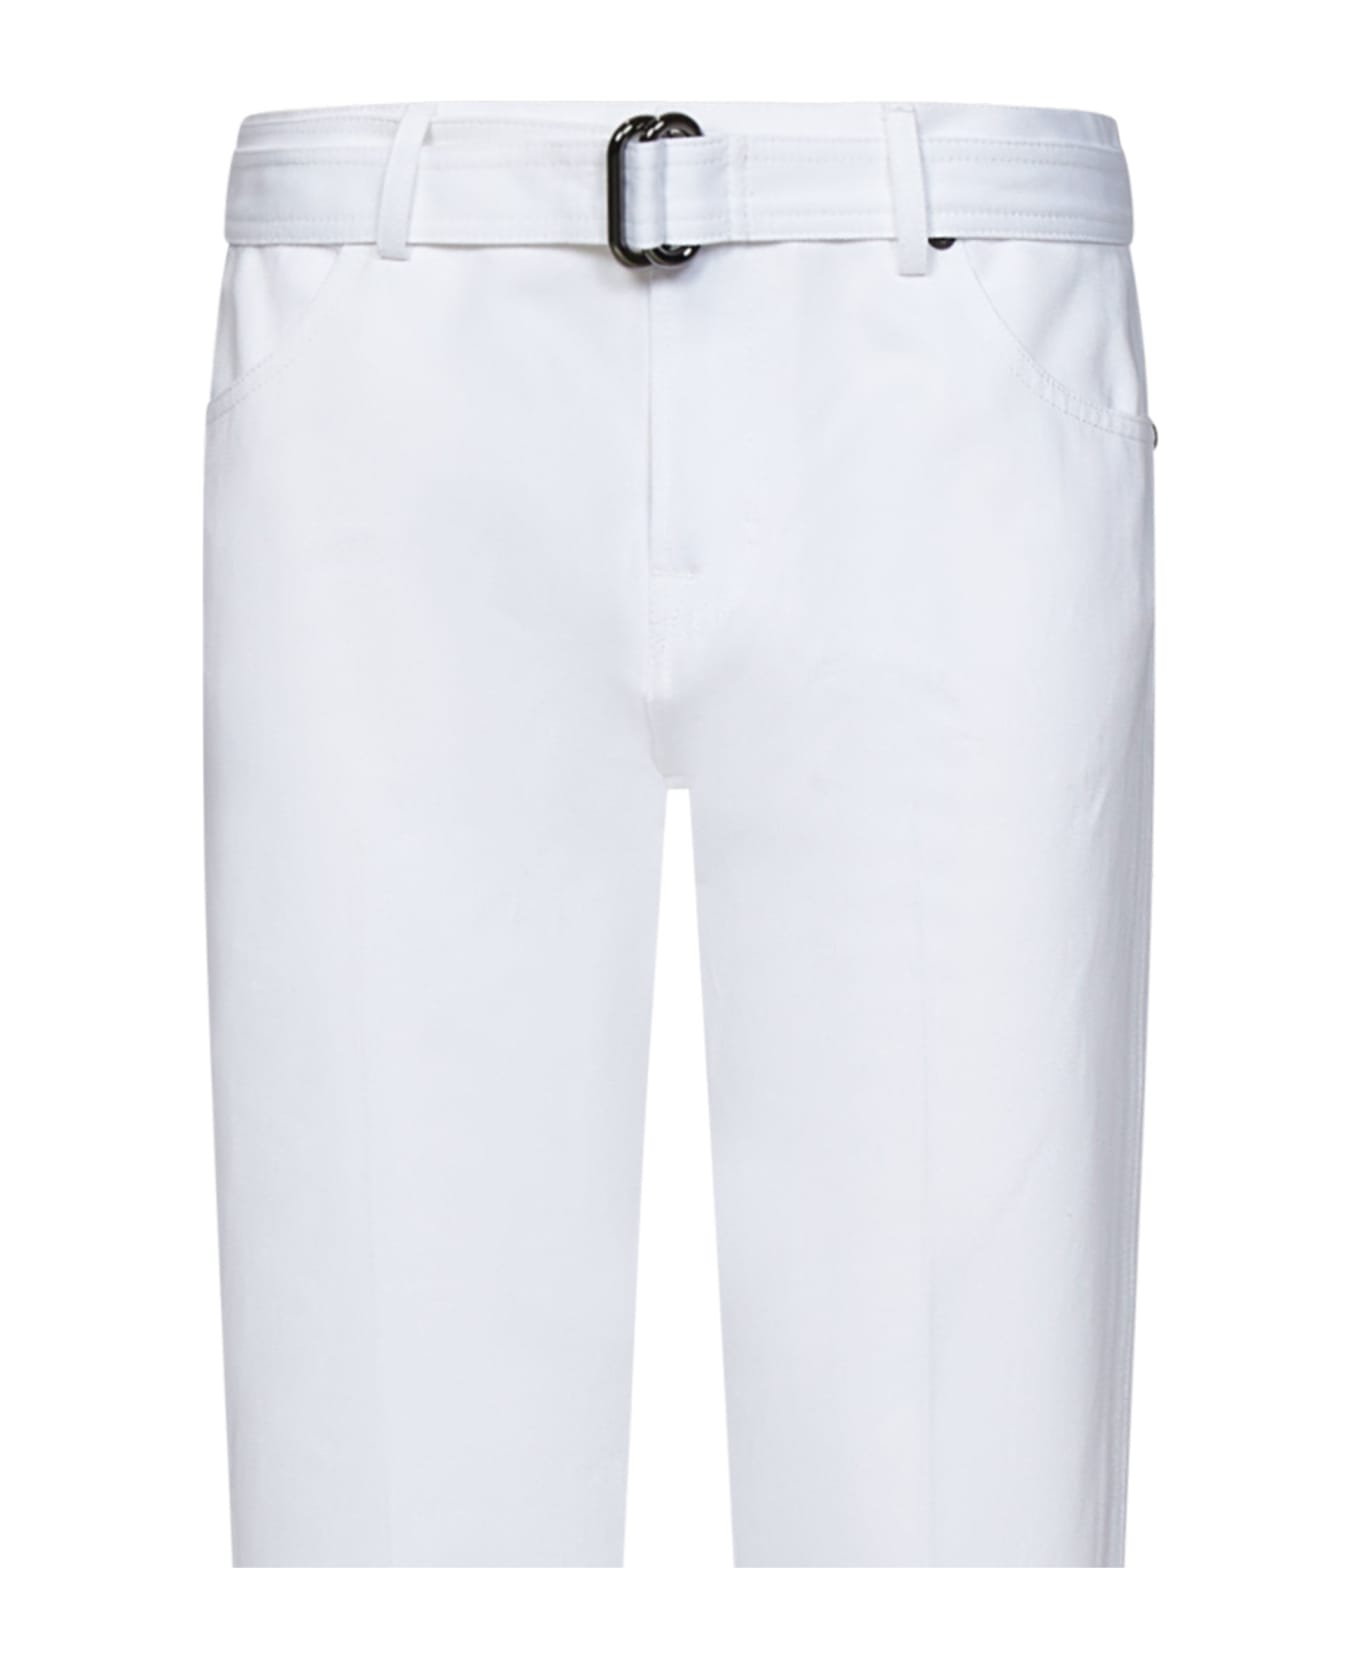 Tom Ford Trousers - White ボトムス